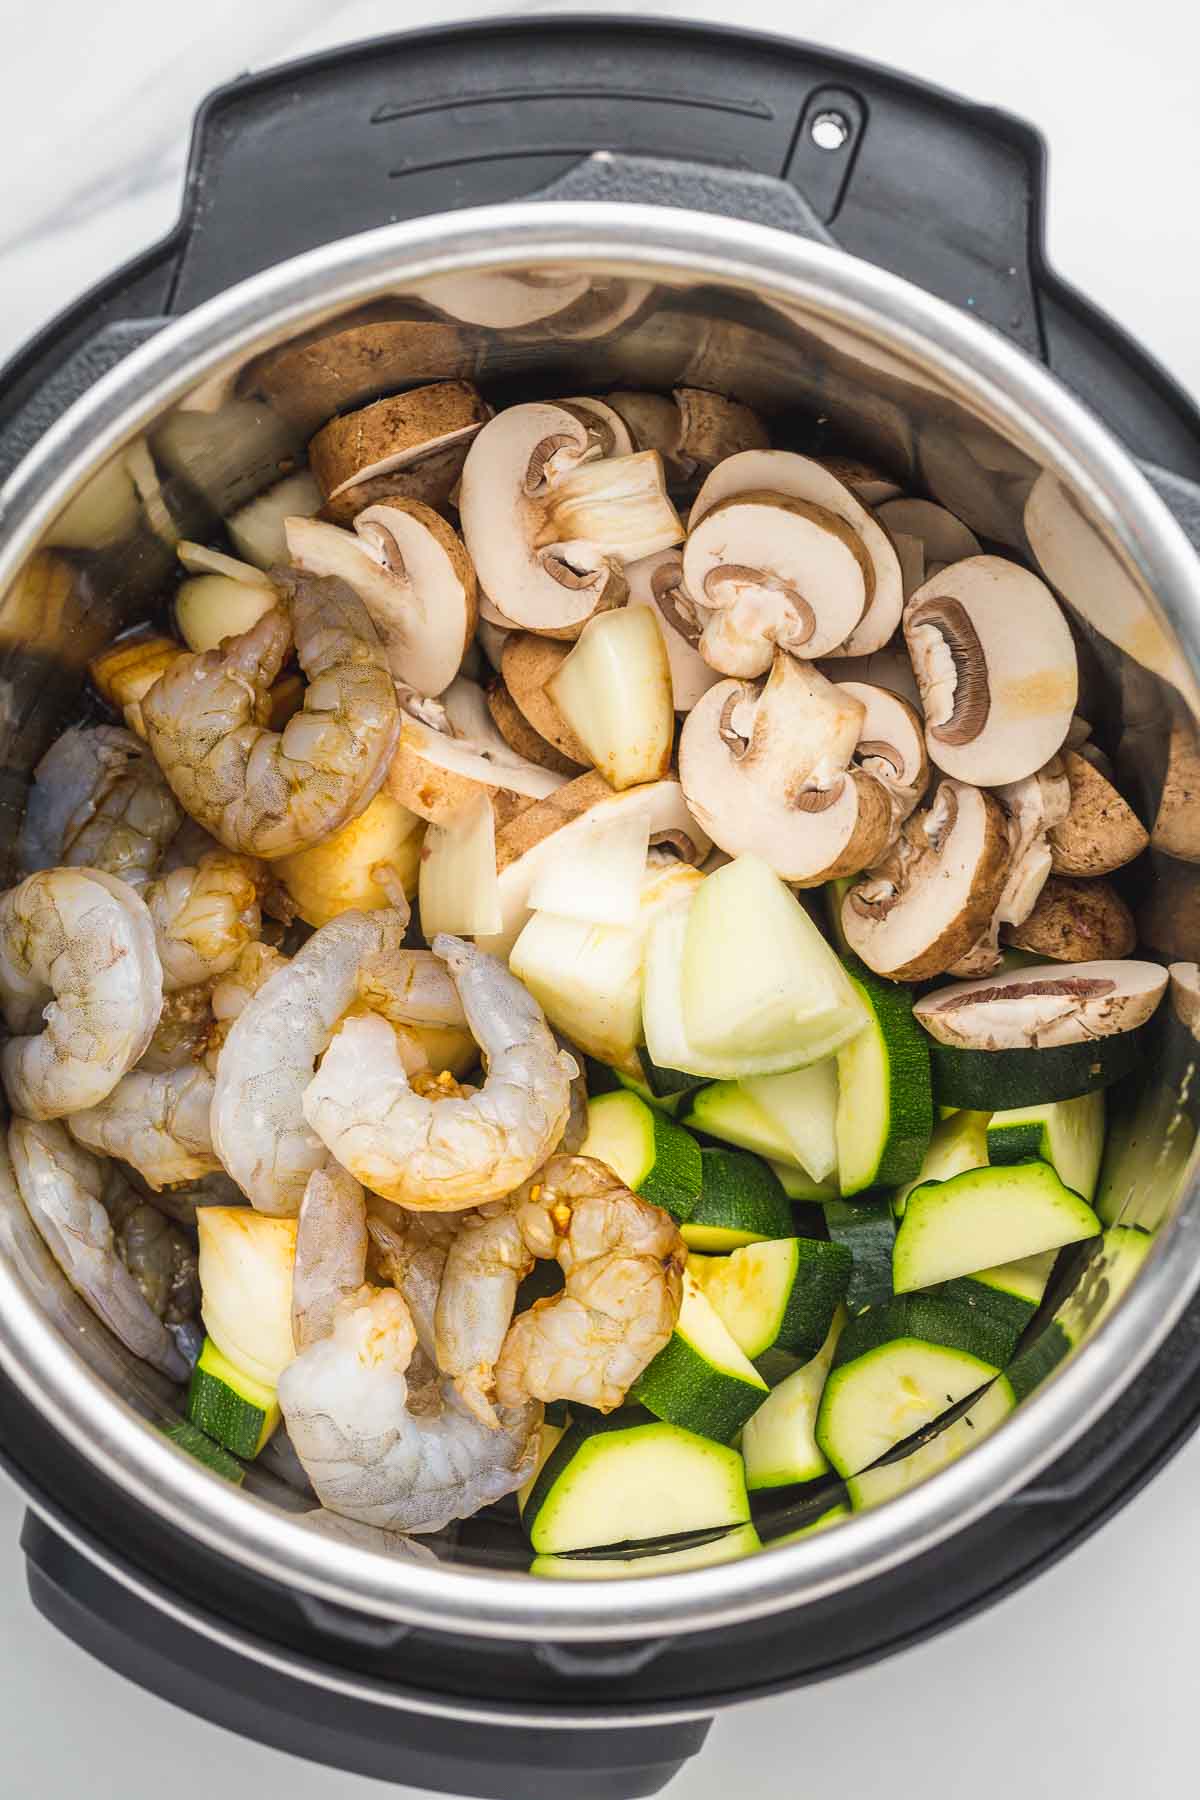 The ingredients in the Instant Pot. Raw thawed shrimp, sliced zucchini, onion, mushrooms.